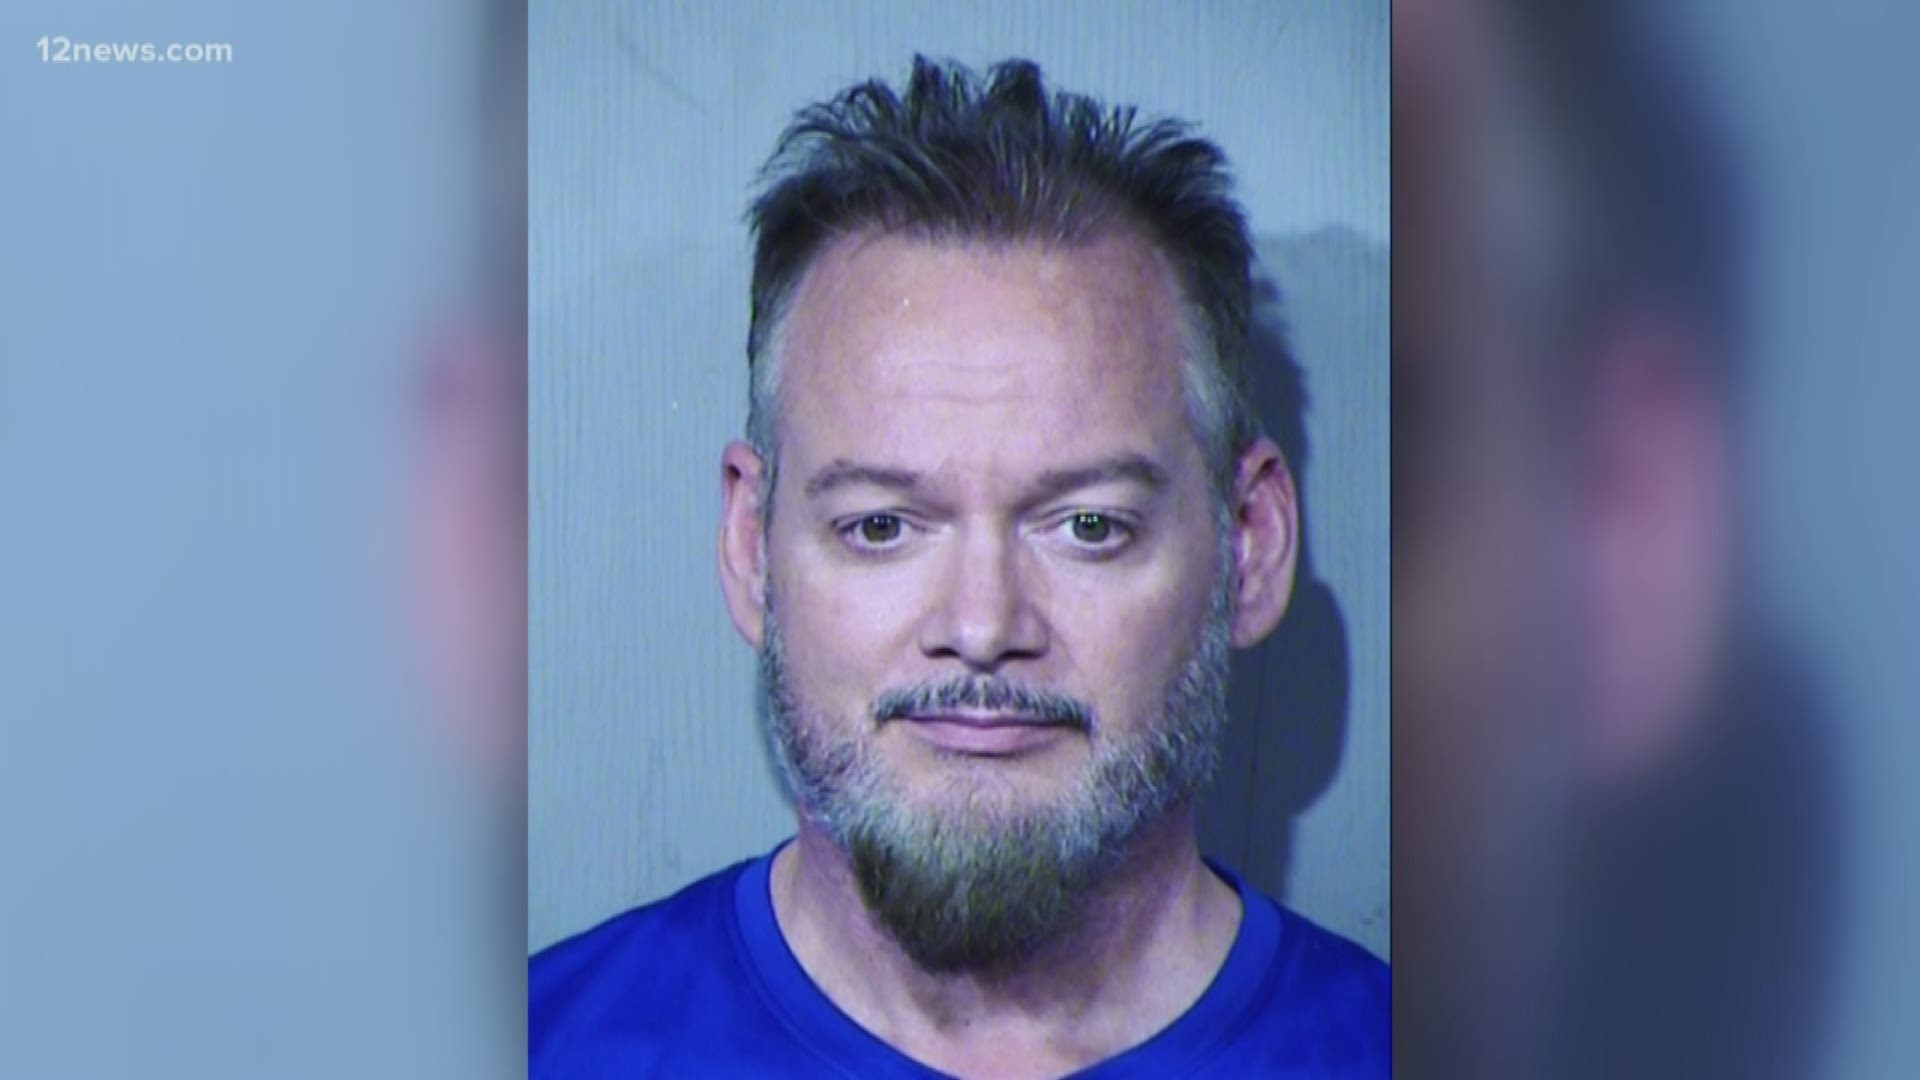 A Valley man, Gordon Golding, is accused of having sex with four girls under 15 and taking videos of them. More victims have come forward since his arrest in August.